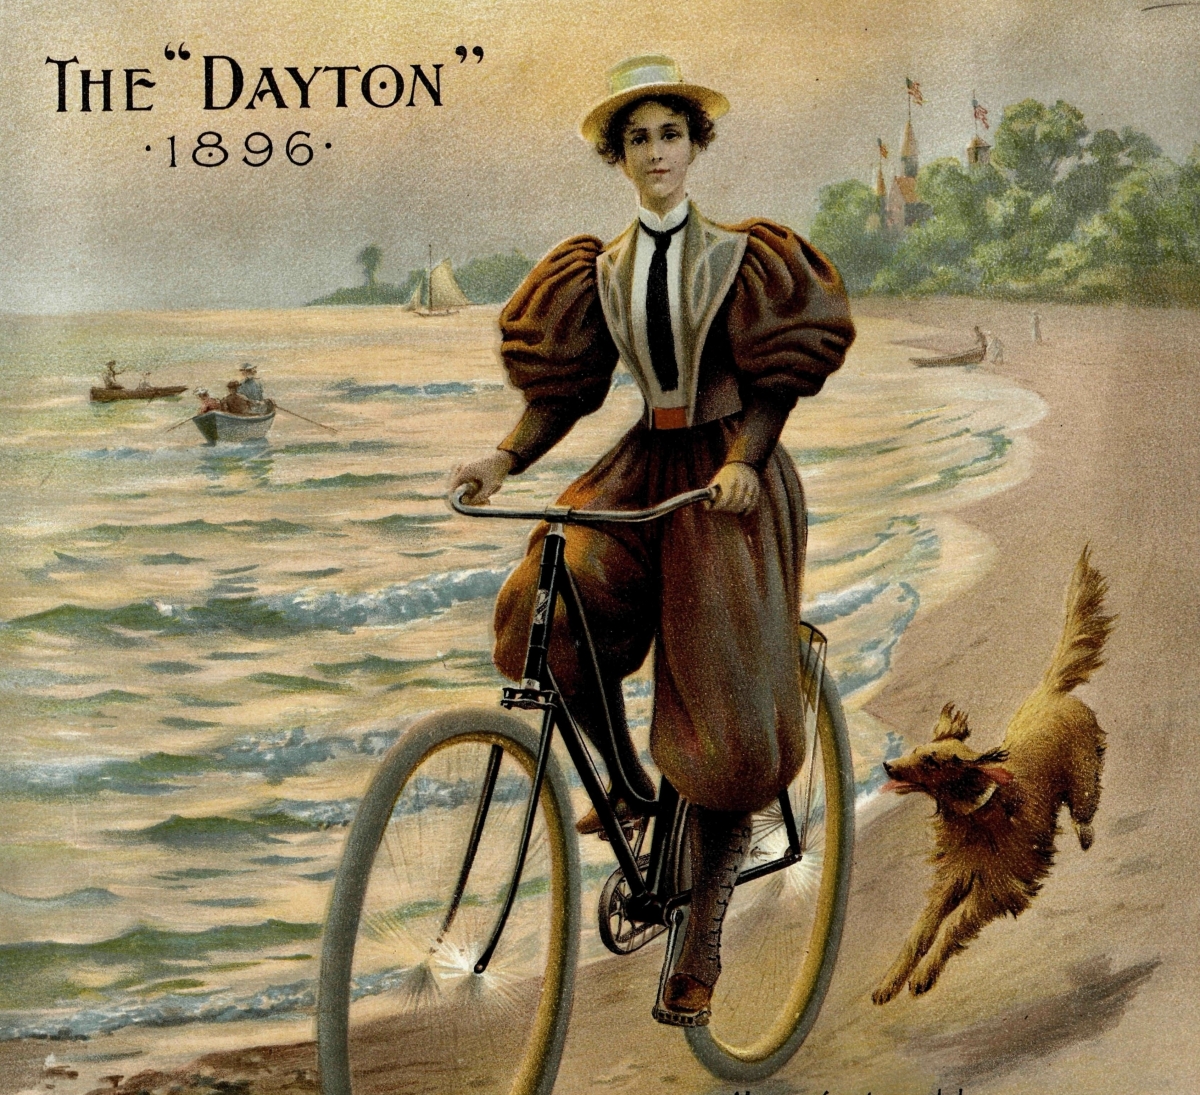 Dayton_bicycles_manufactured_by_the_Davis_Sewing__1896 (1 of 1) (1)_Page_01.jpg